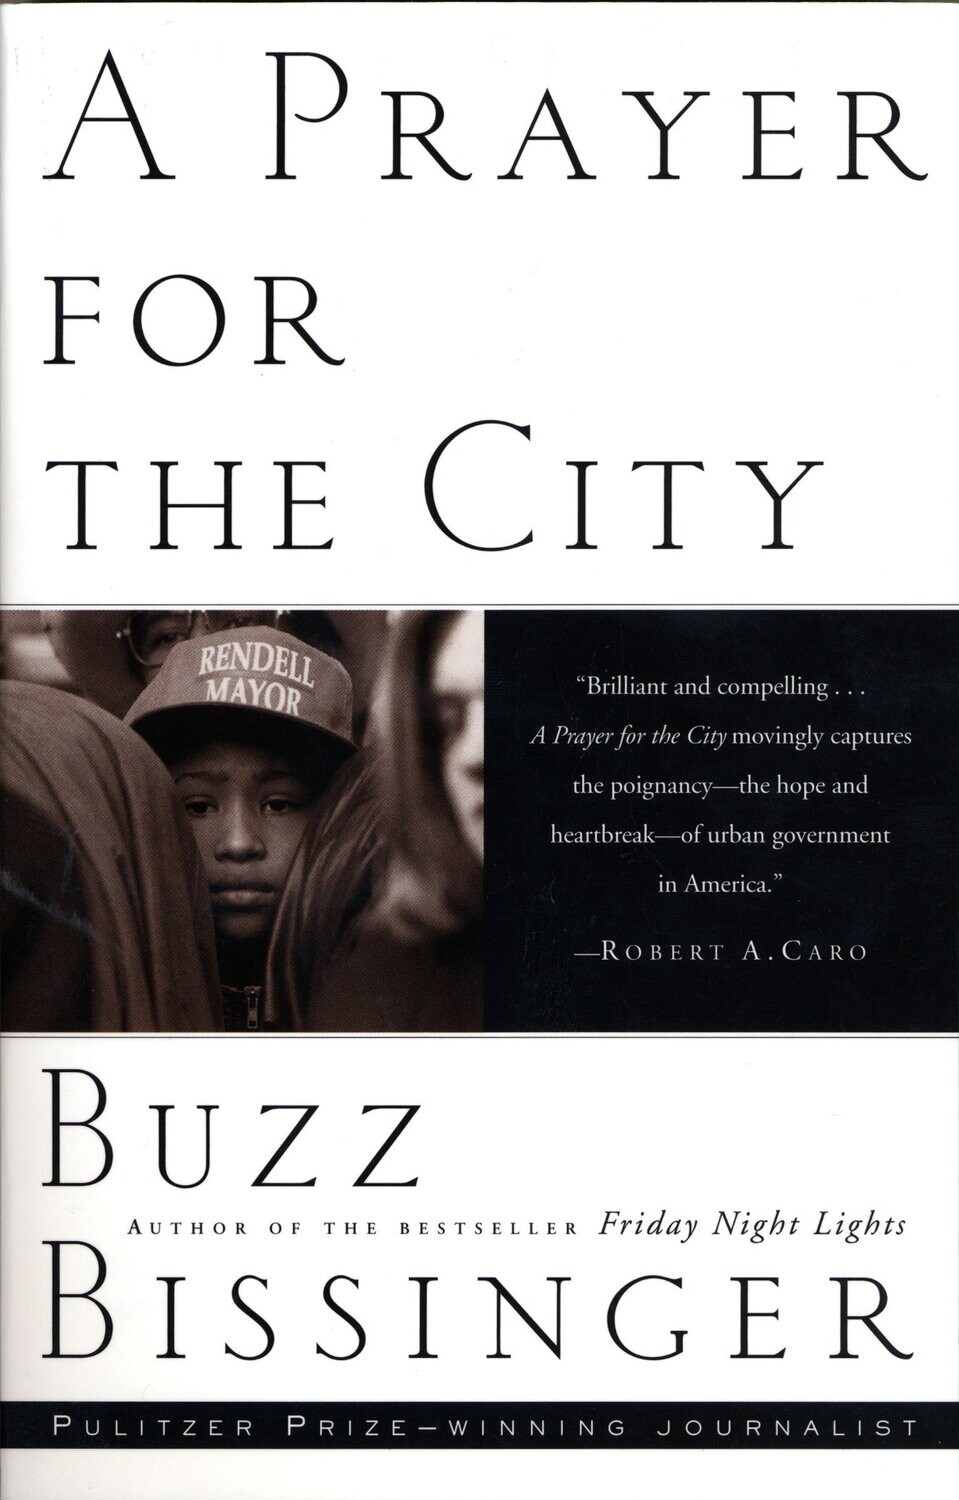 A Prayer for the City by Buzz Bissinger